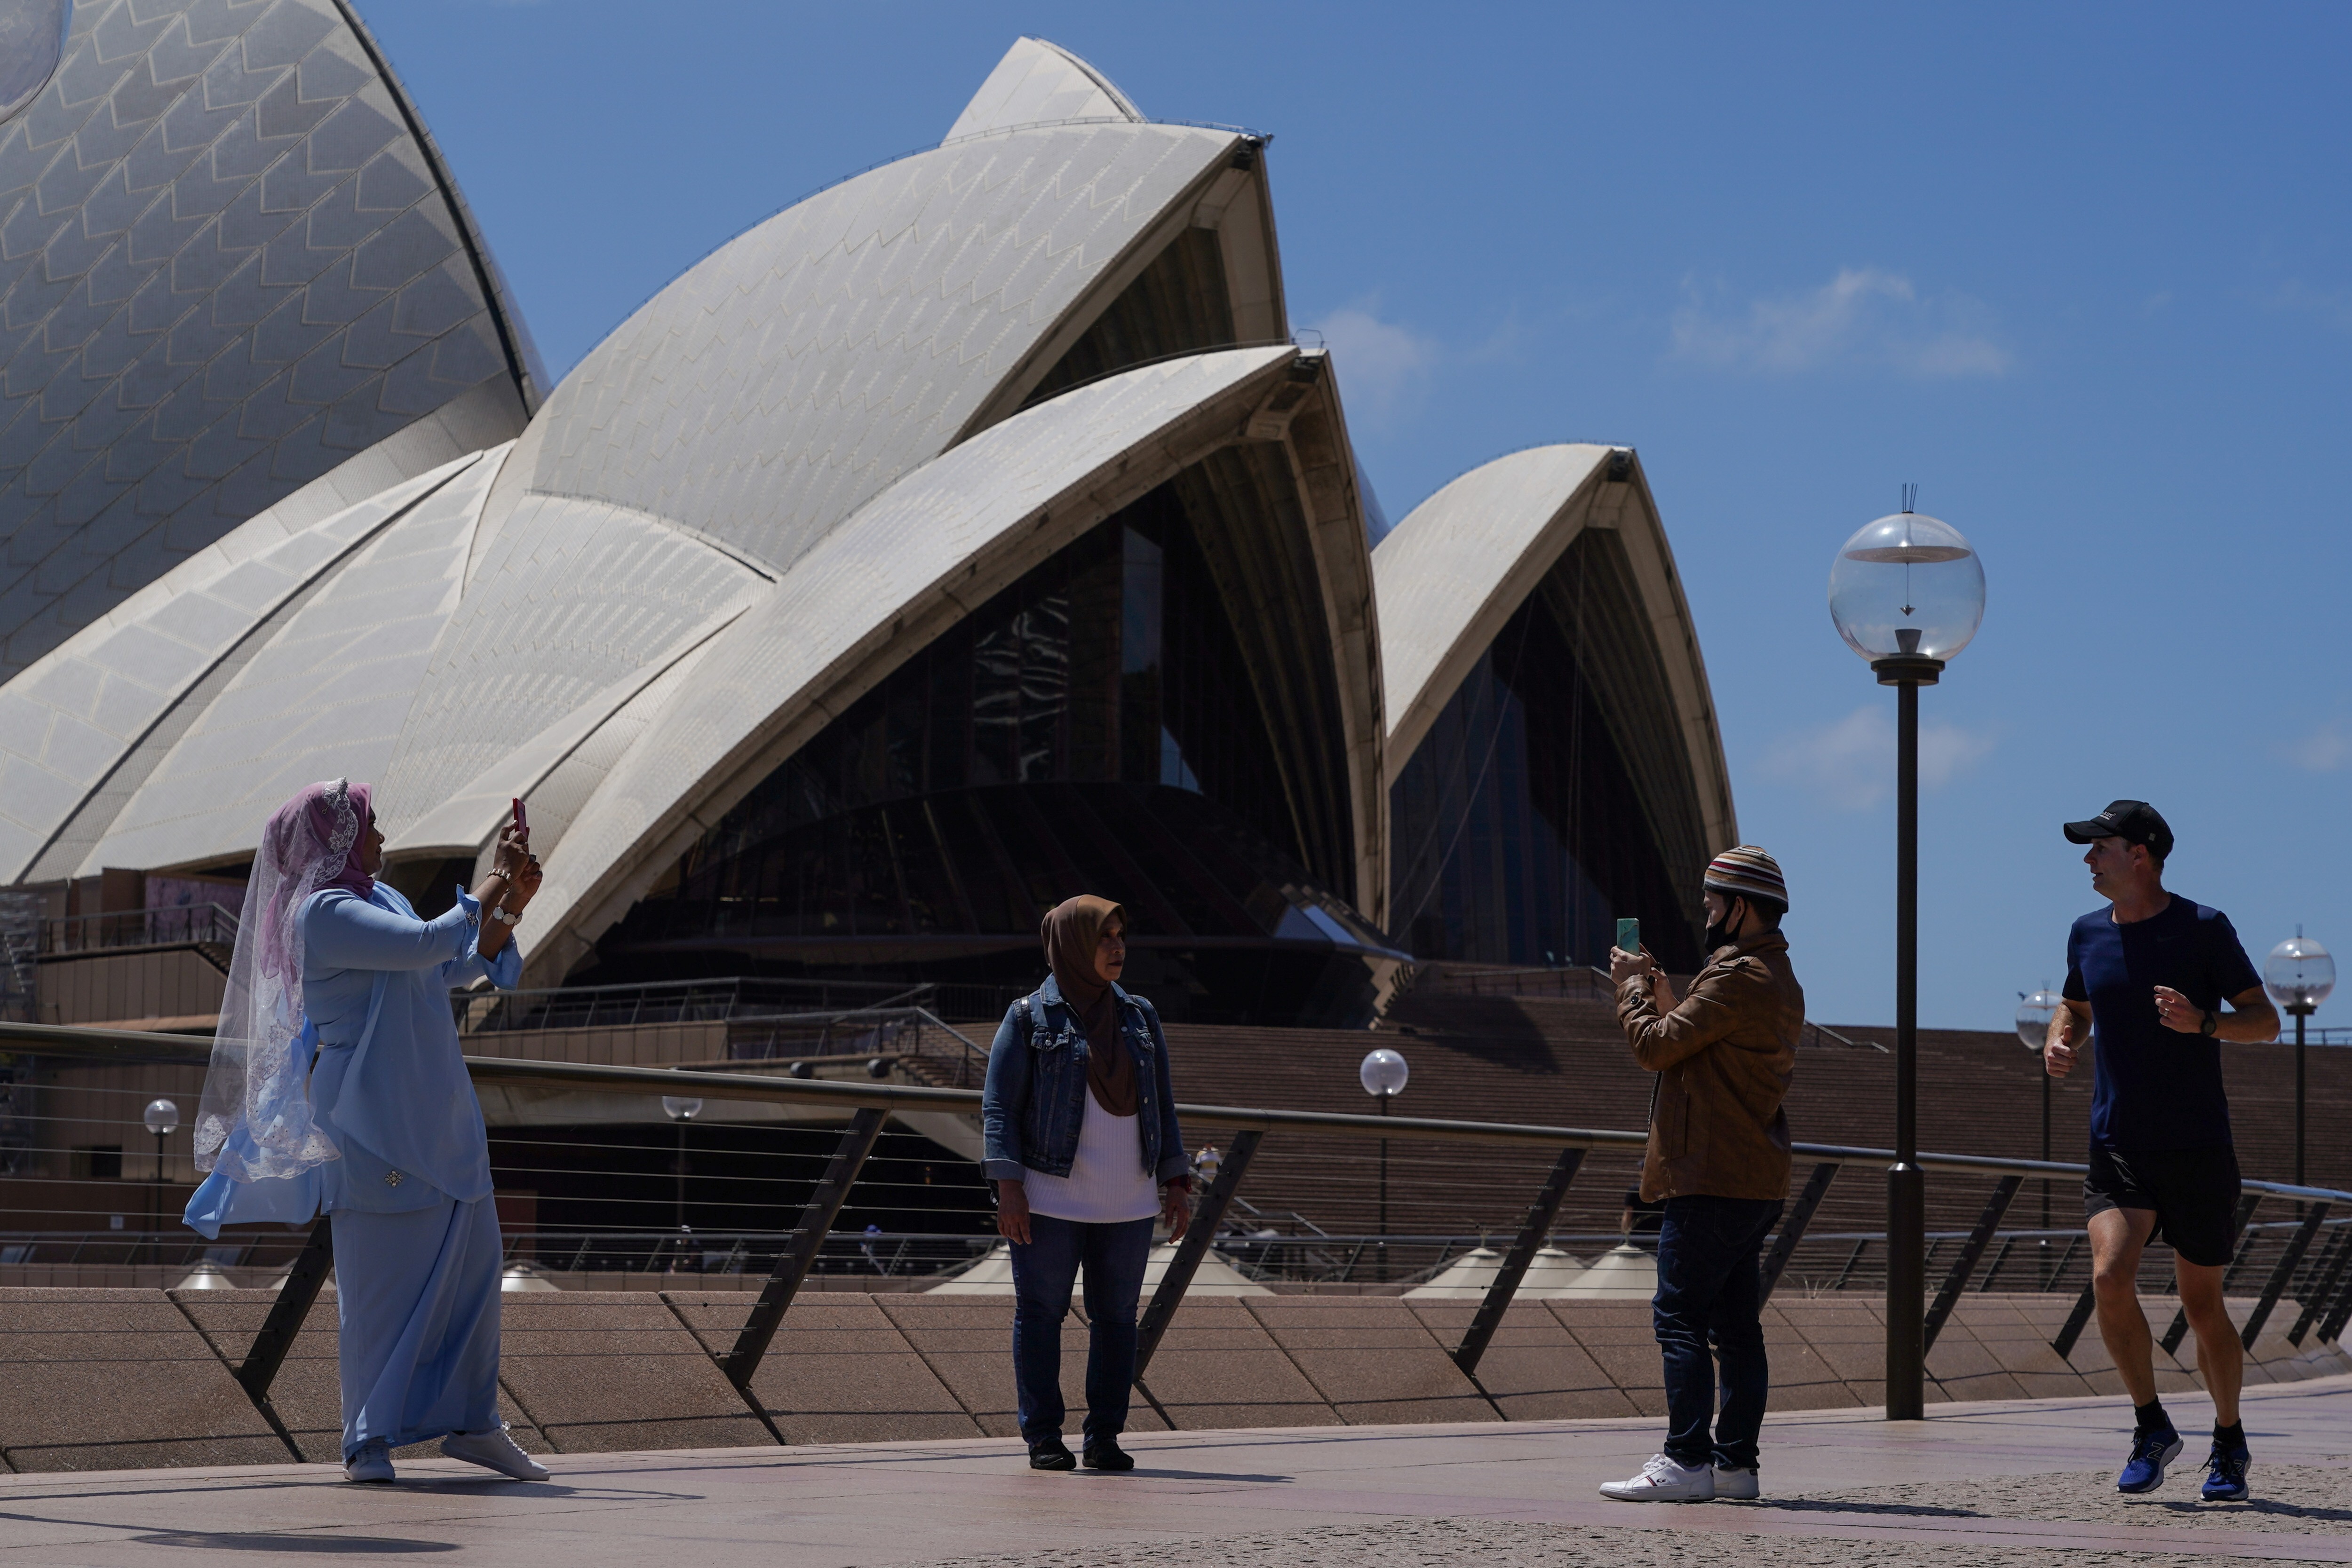 People take pictures in front of the Opera House in Sydney, Australia. Photo: Reuters